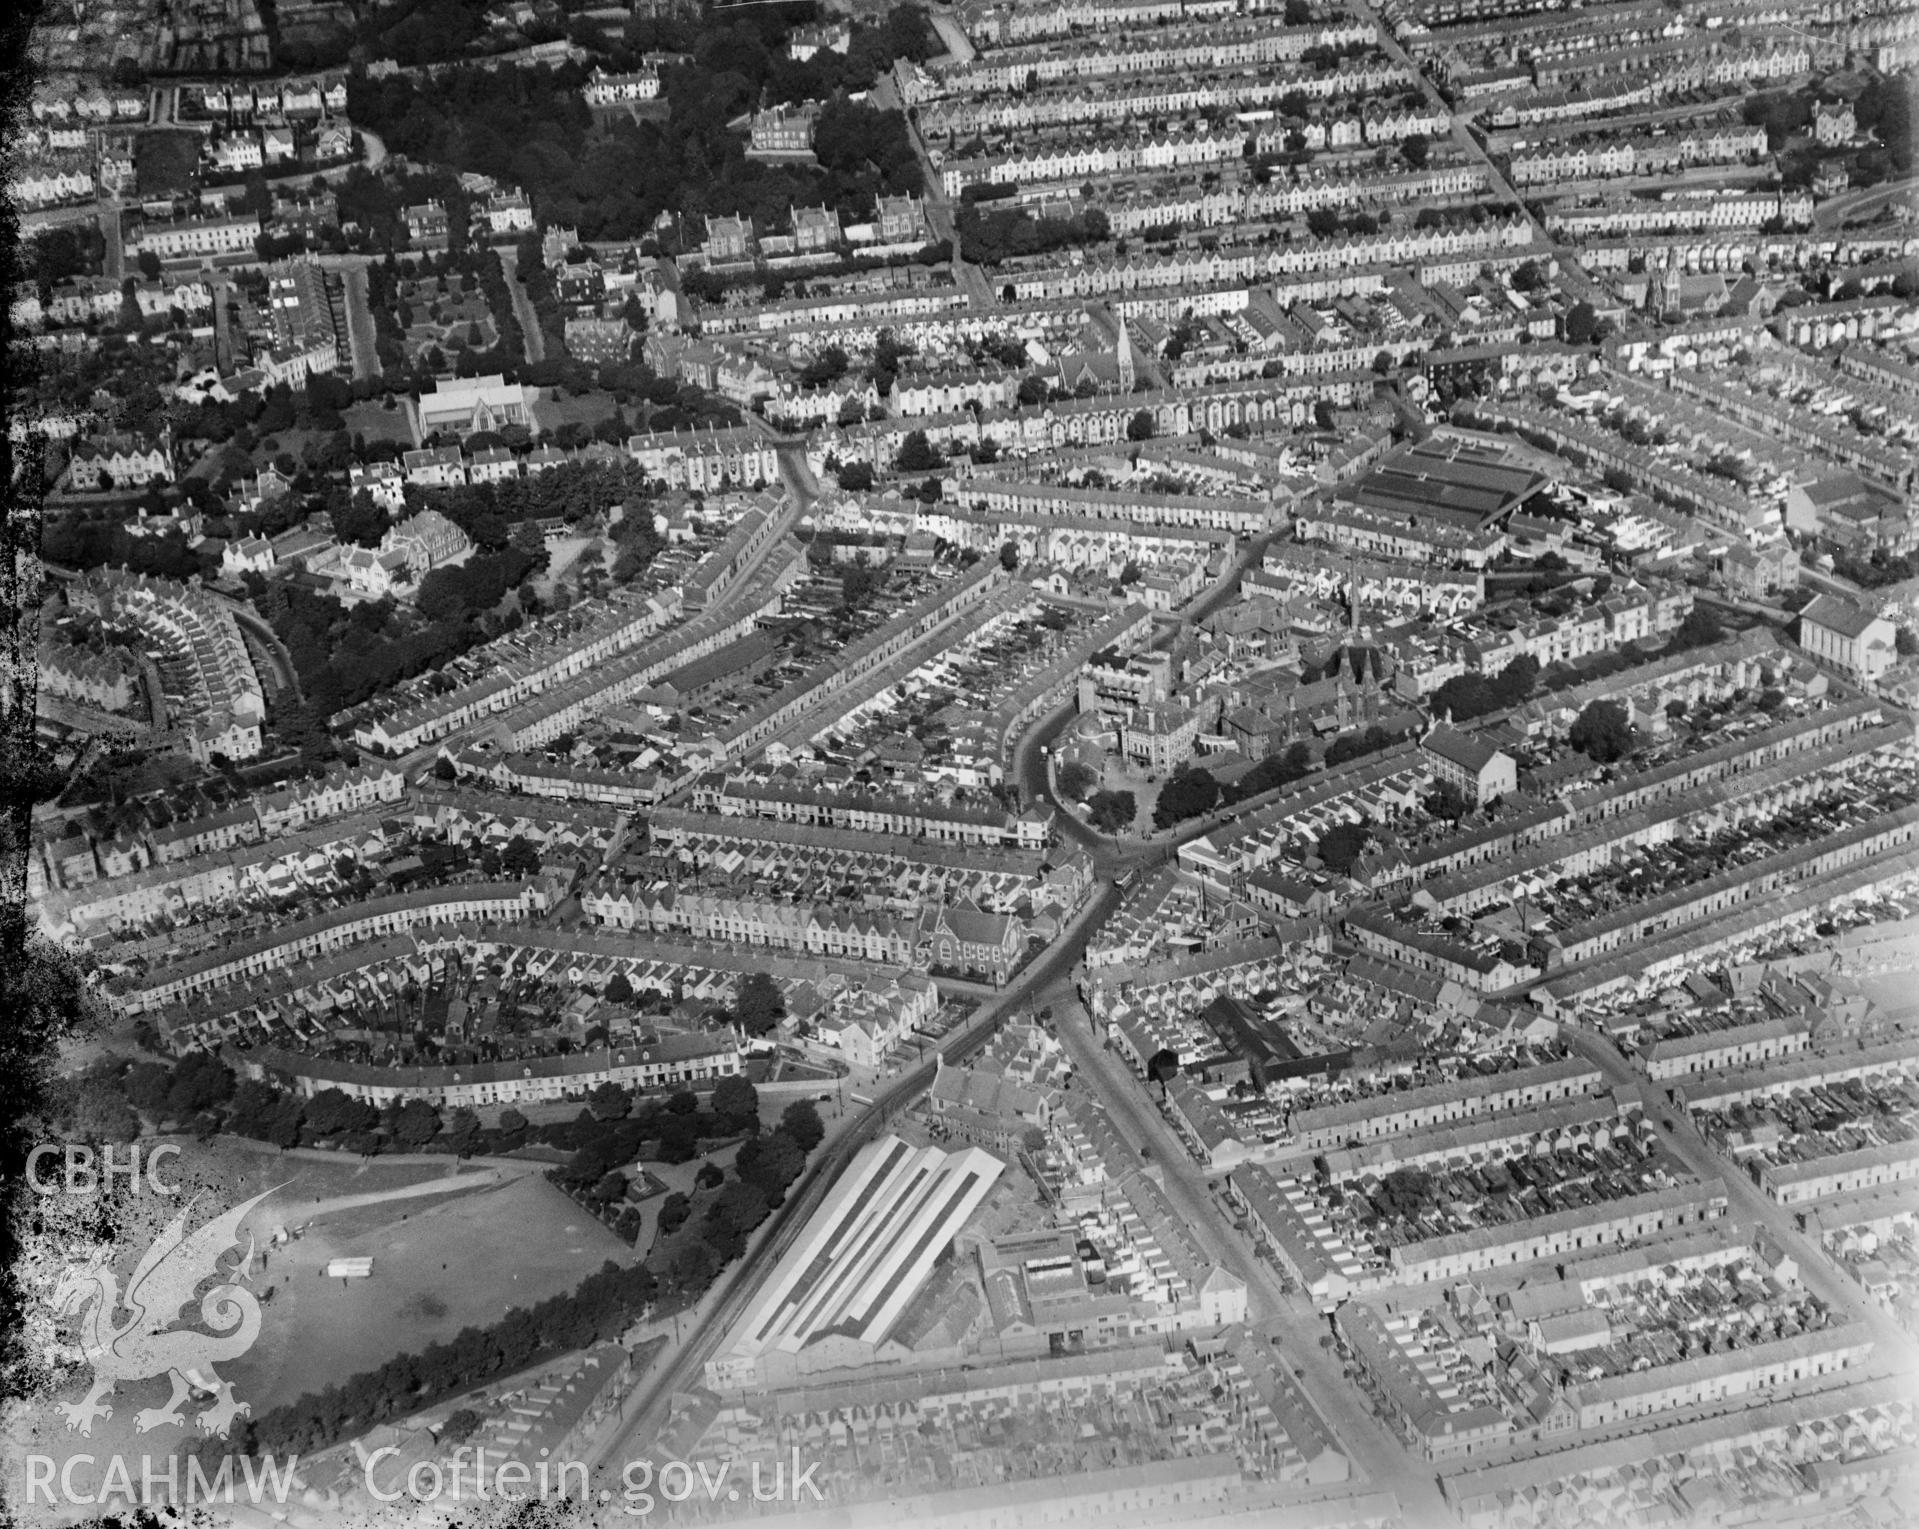 View of residential areas of Swansea, oblique aerial view. 5?x4? black and white glass plate negative.